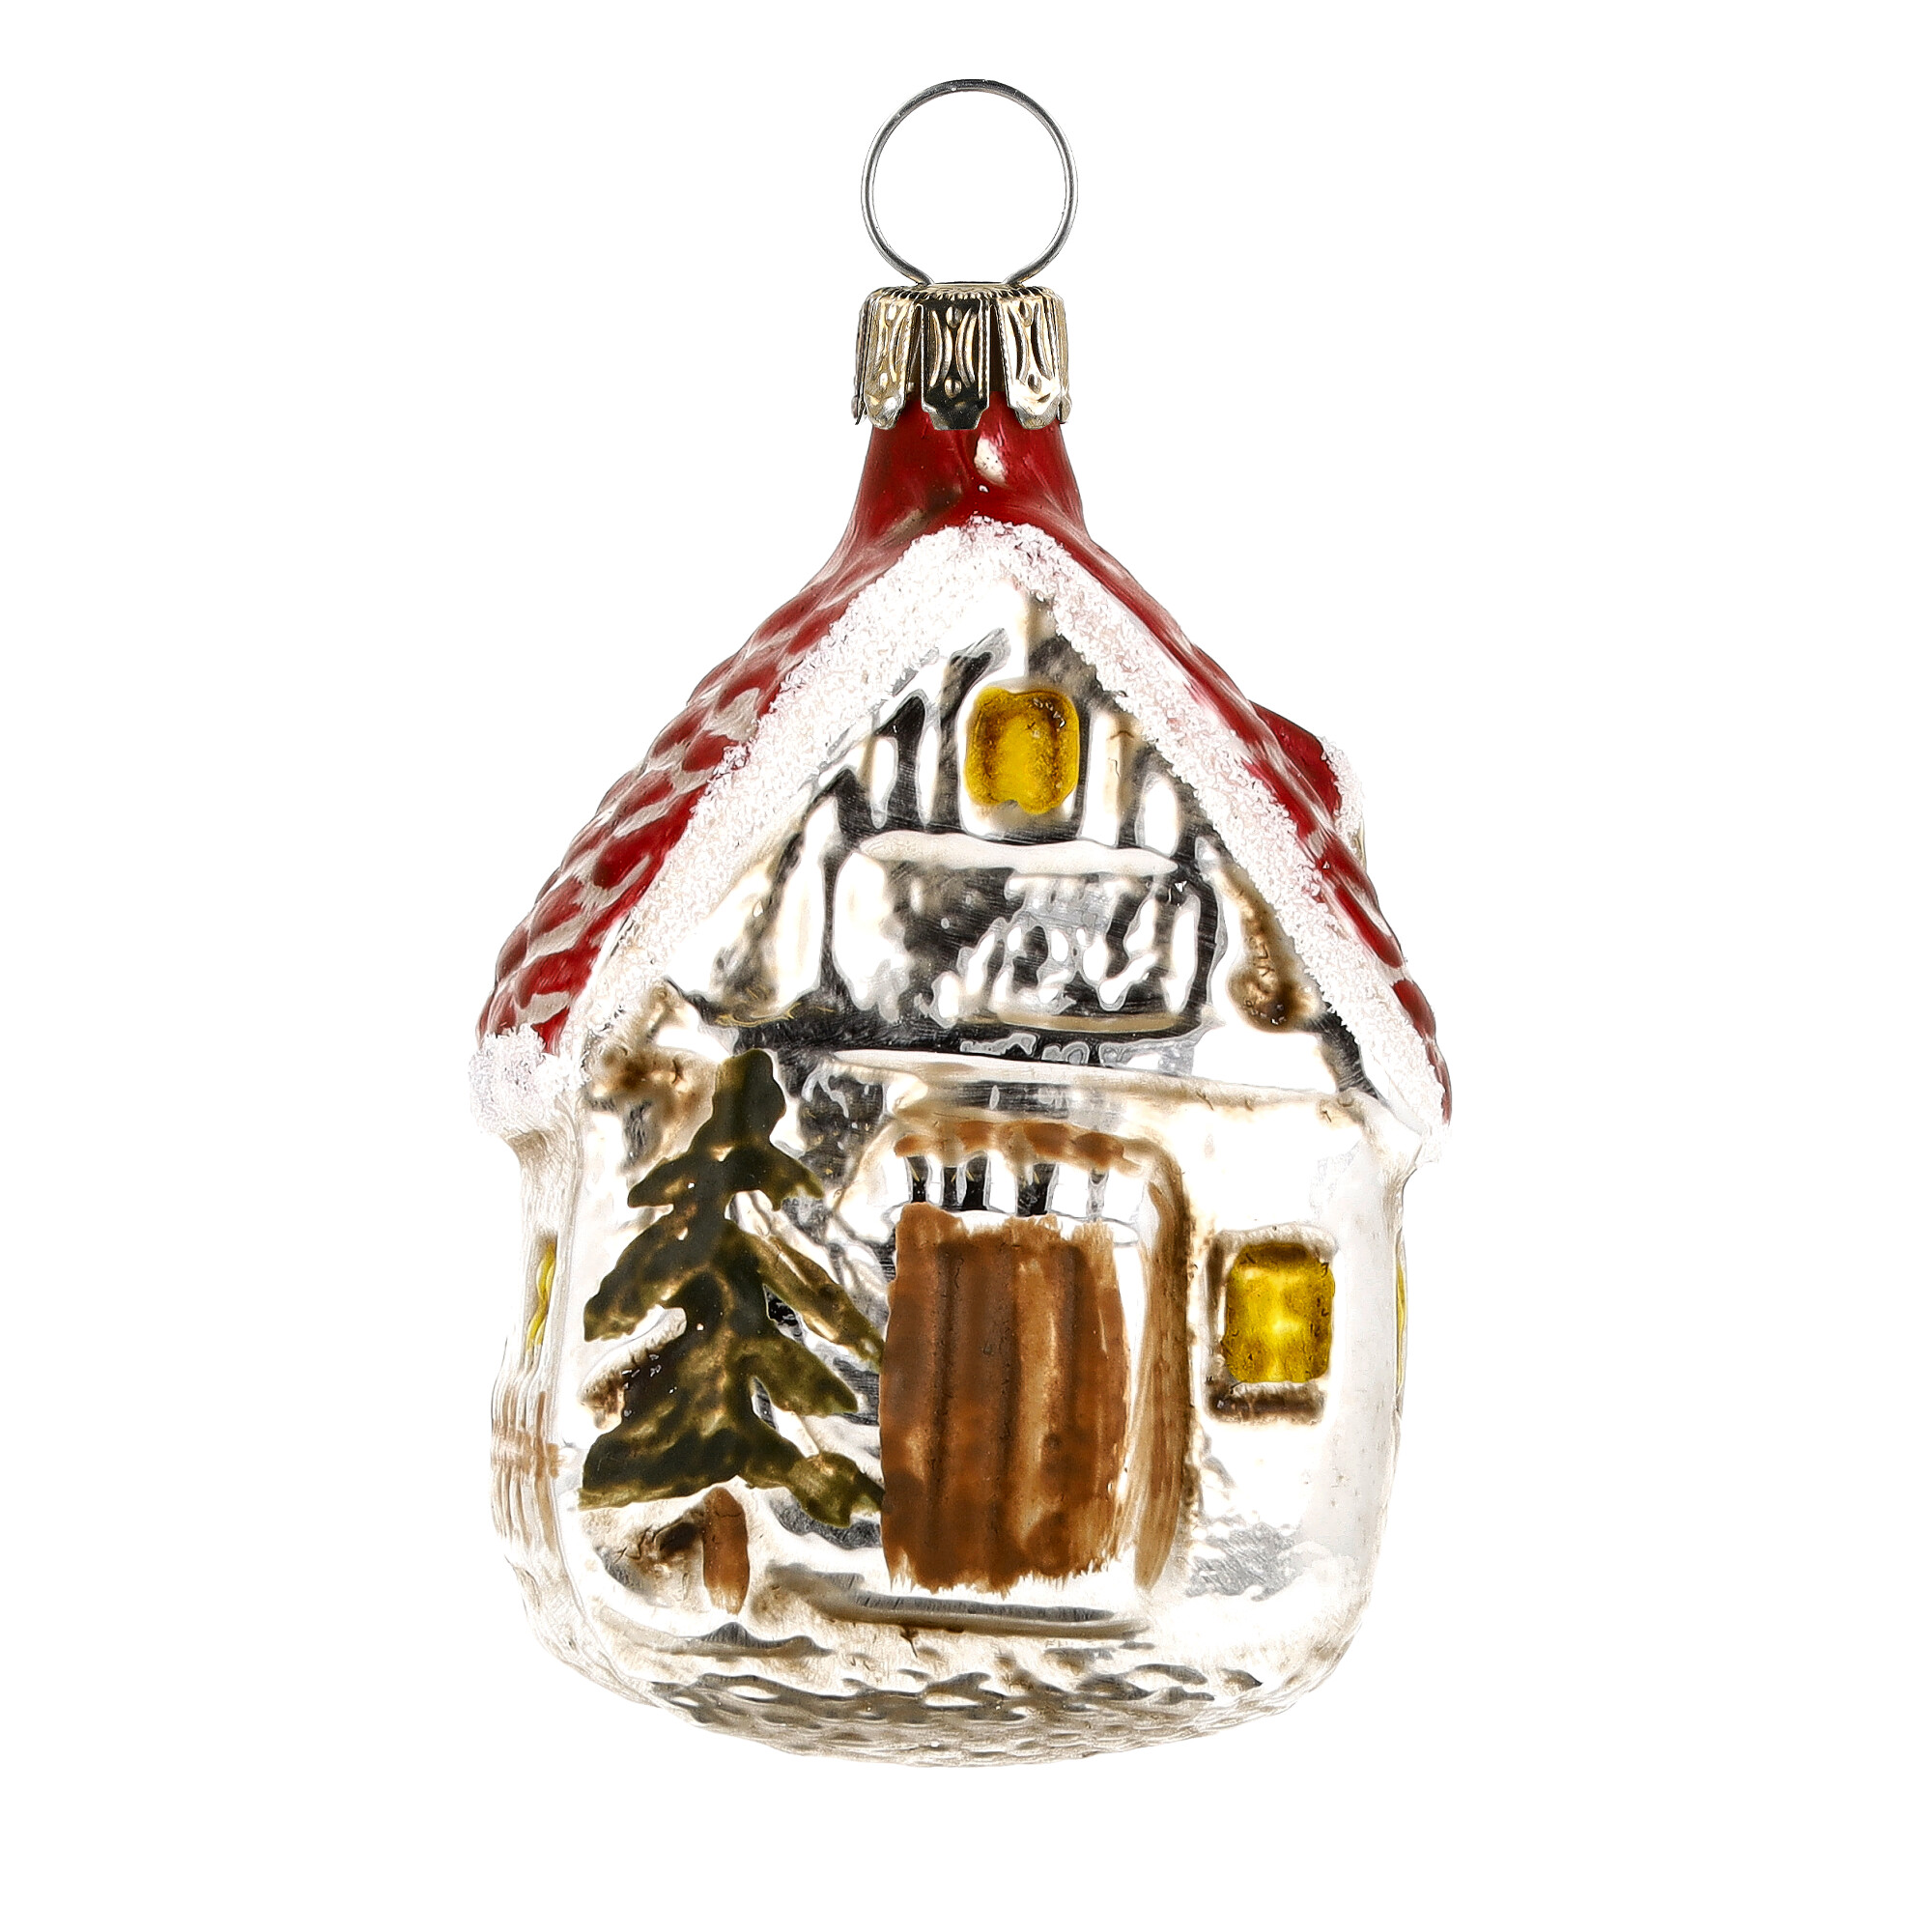 Retro Vintage style Christmas Glass Ornament - Forest house with glitter